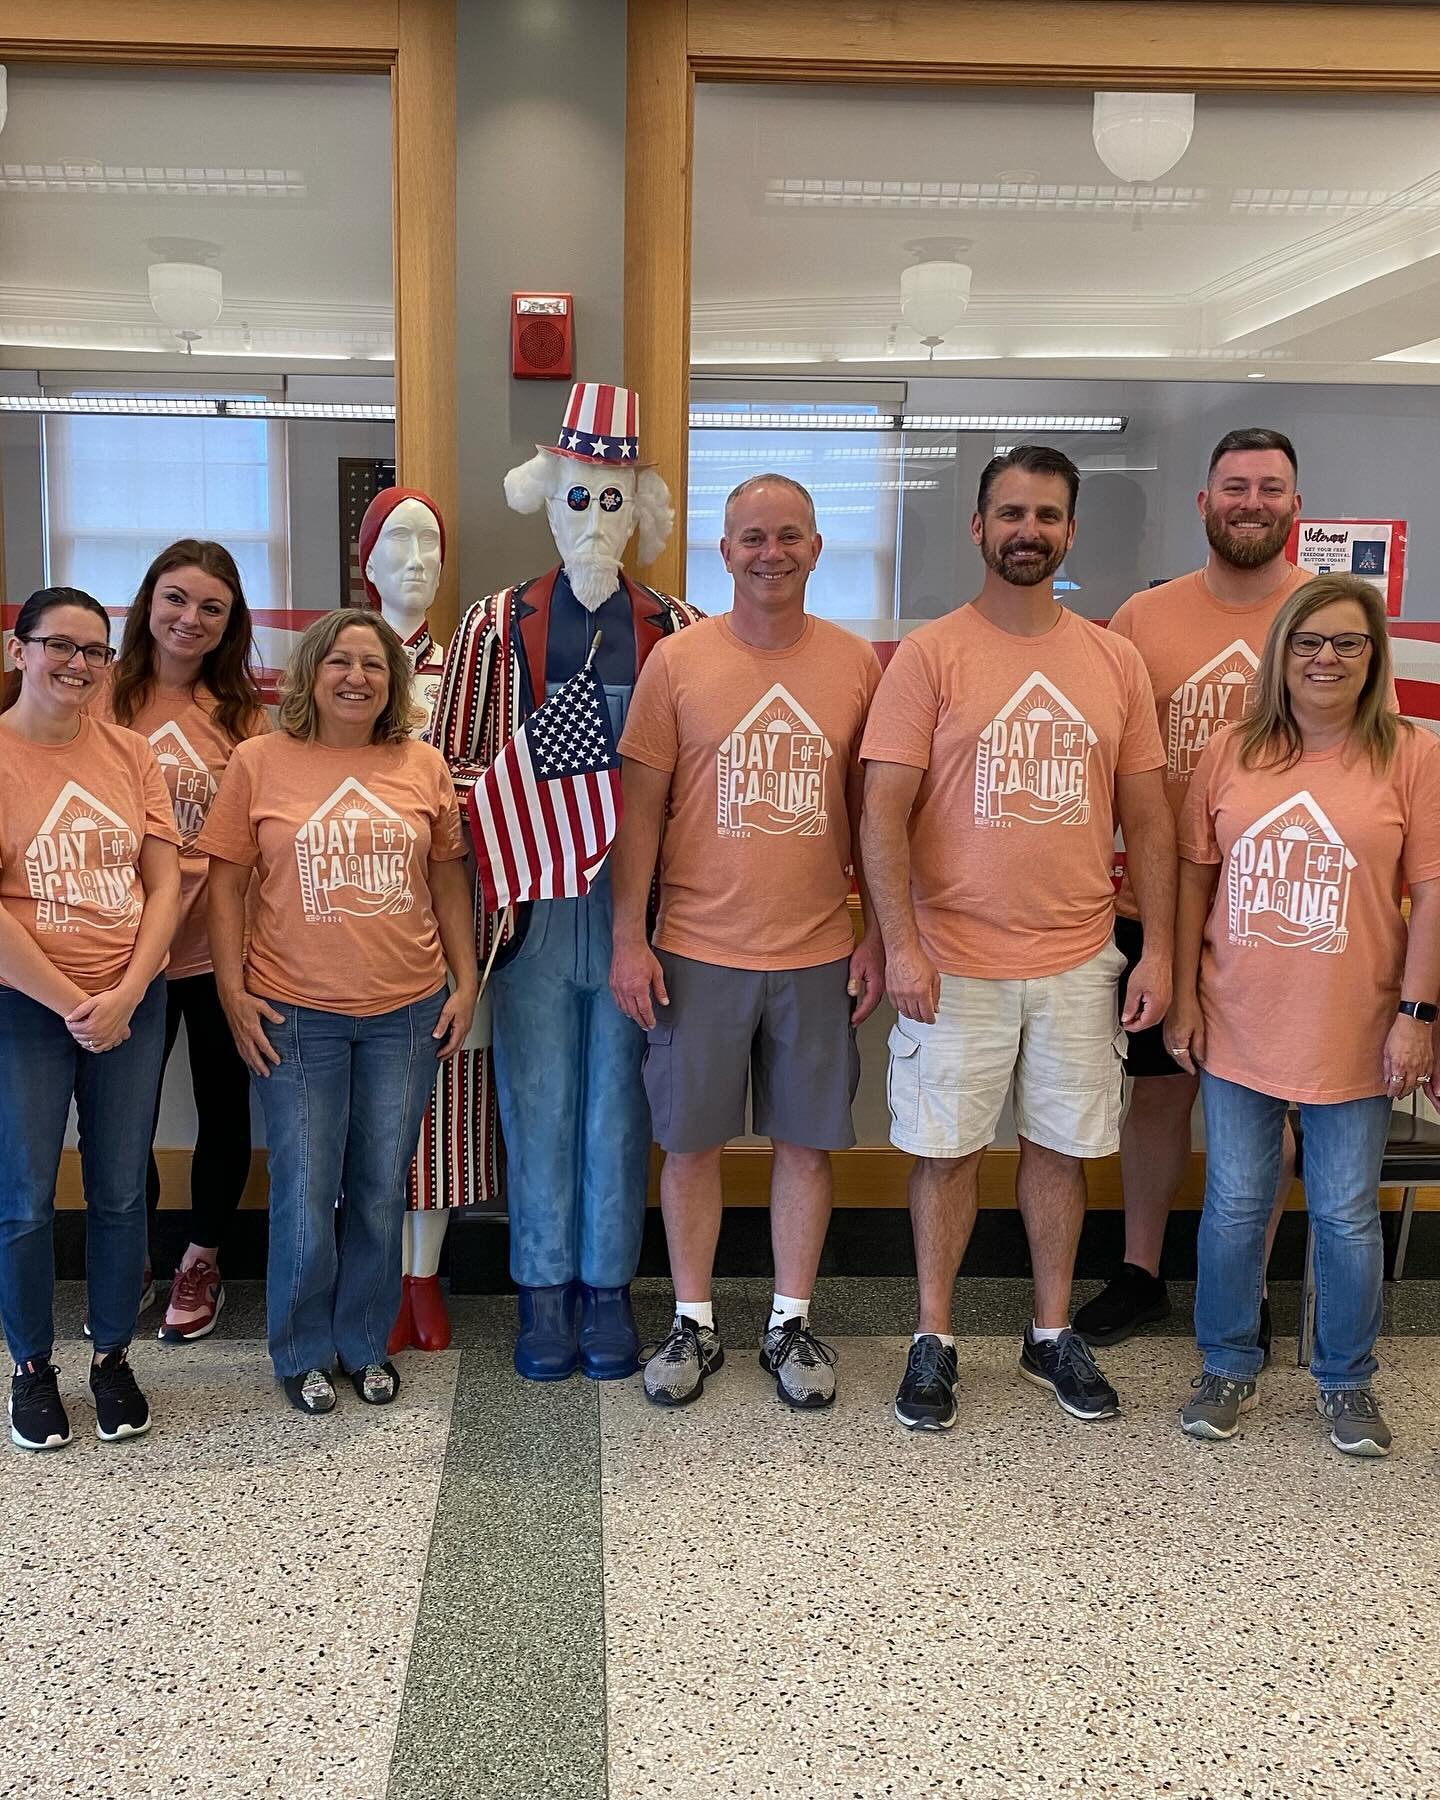 Our friends at Farmers State Bank joined us this morning for the annual United Way Day of Caring! 

They spent the morning helping us gear up for festival season - washing trash cans, stuffing button envelopes, and folding flags for our upcoming Flag